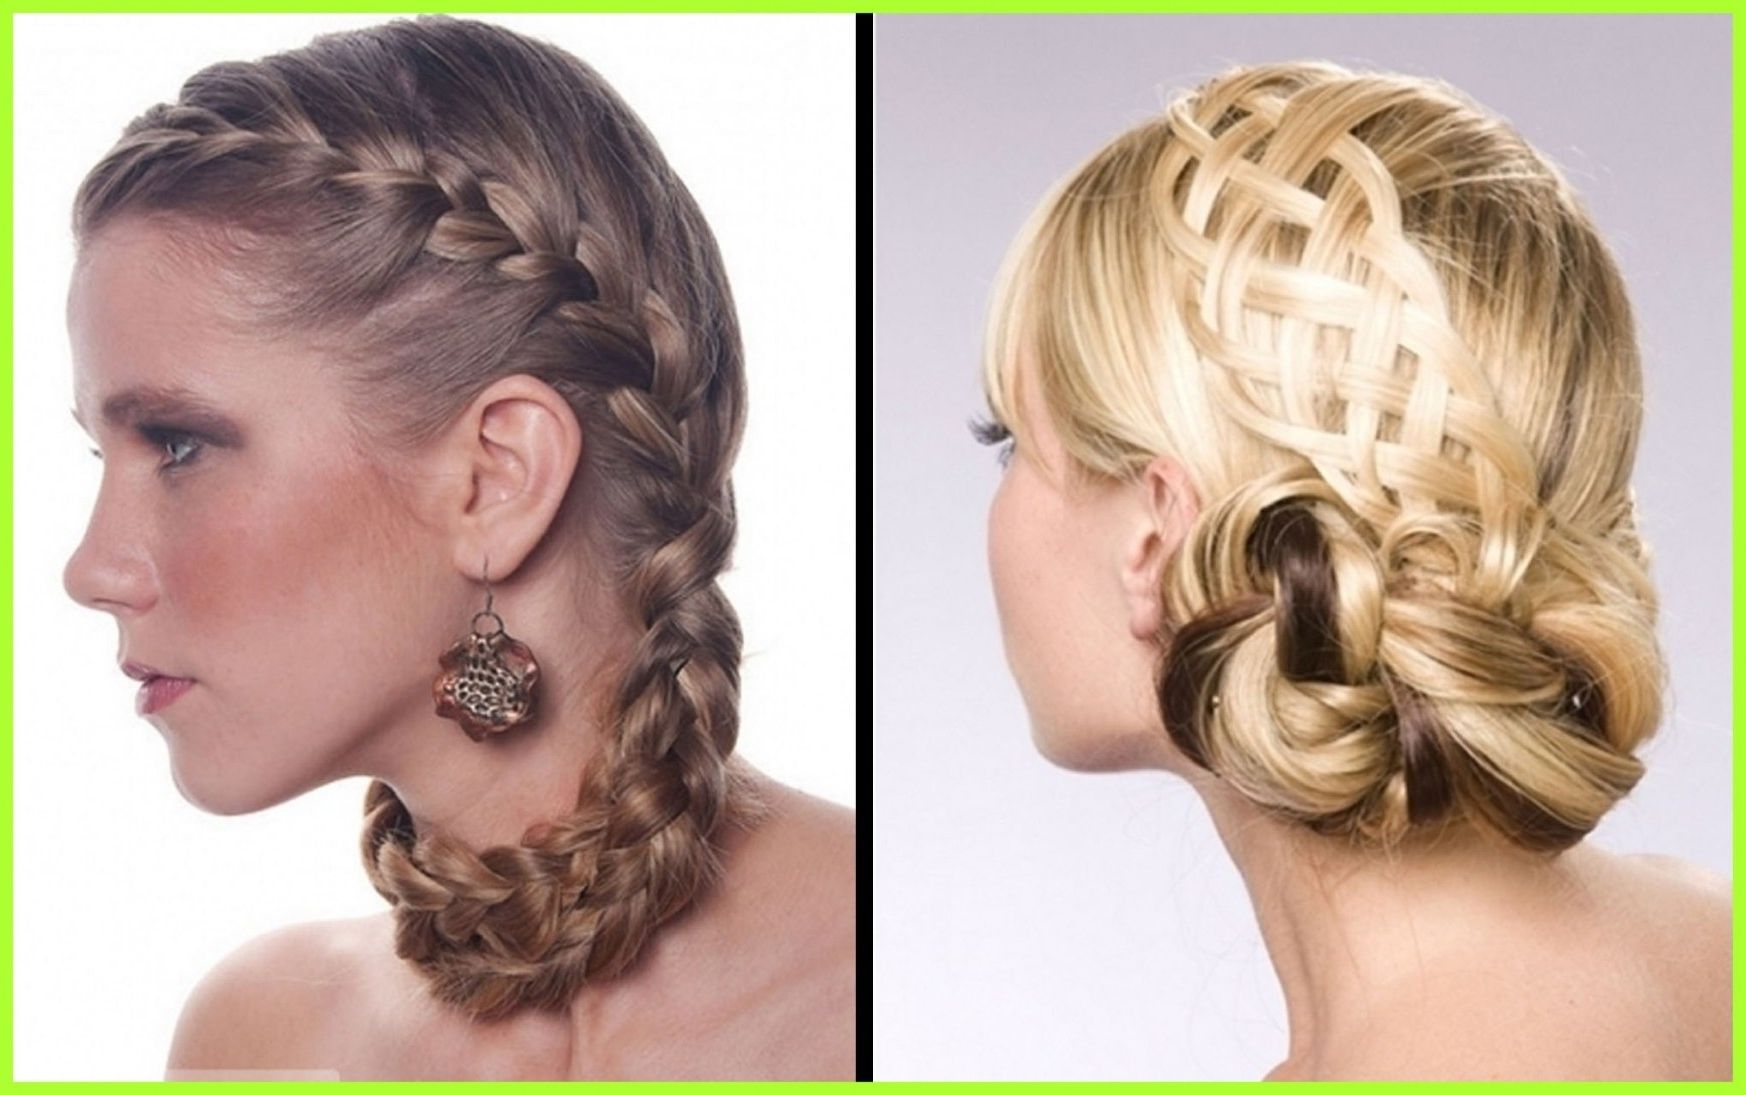 Newest Braided Evening Hairstyles Within Awesome Braided Updo Hairstyles Hair Salon Formal For Women Medium (View 9 of 15)